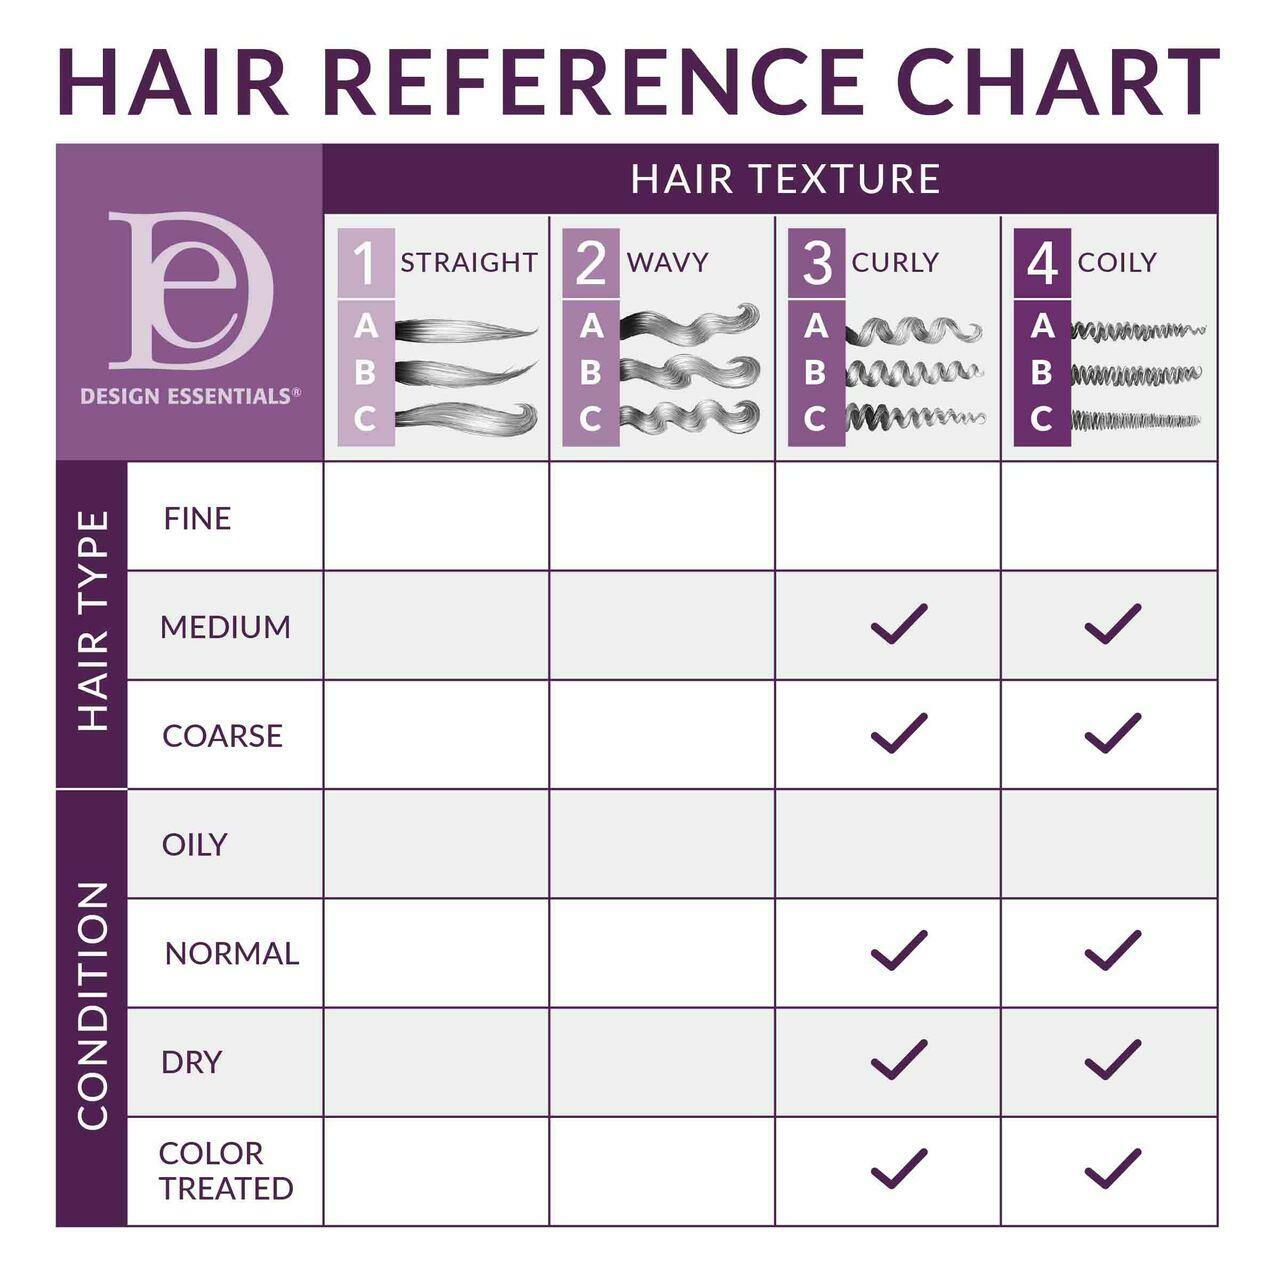 Wash_Day_Deep_Moisture_Mask_-_Hair_Reference_Chart__15802.1621434149